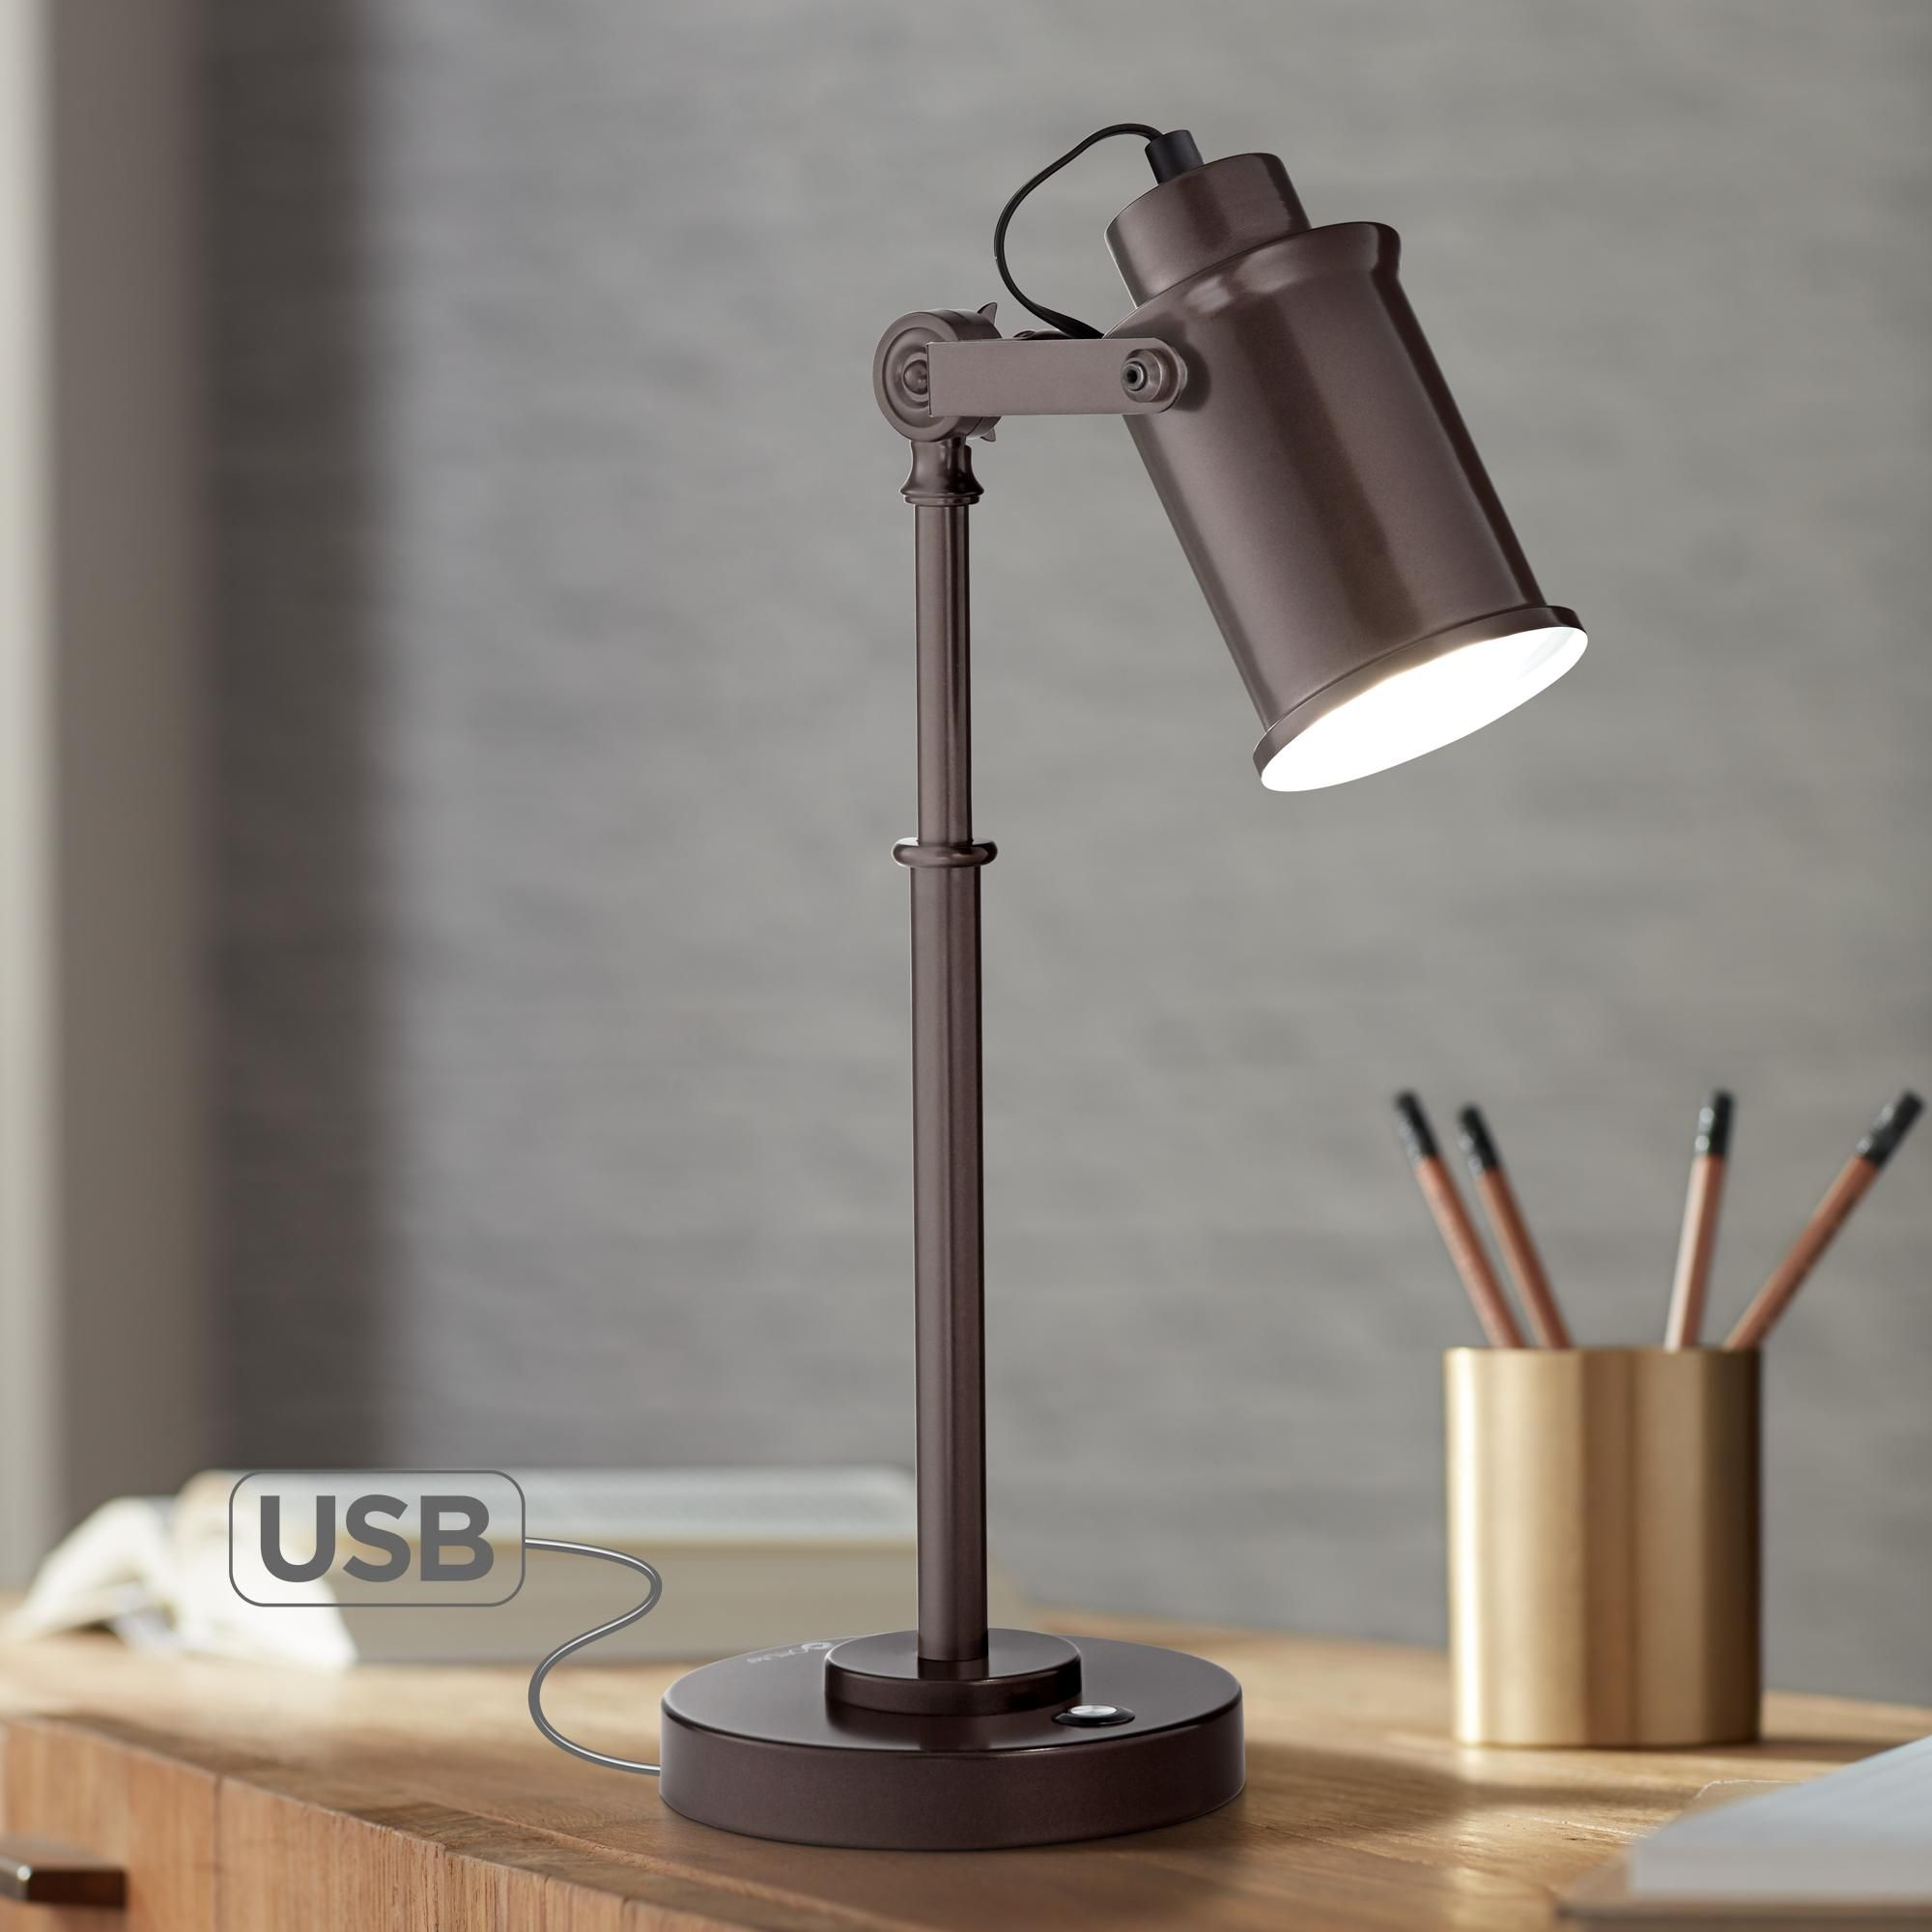 Restore Led Desk Lamp With Usb Port Ottlite In 2019 Led throughout dimensions 2000 X 2000